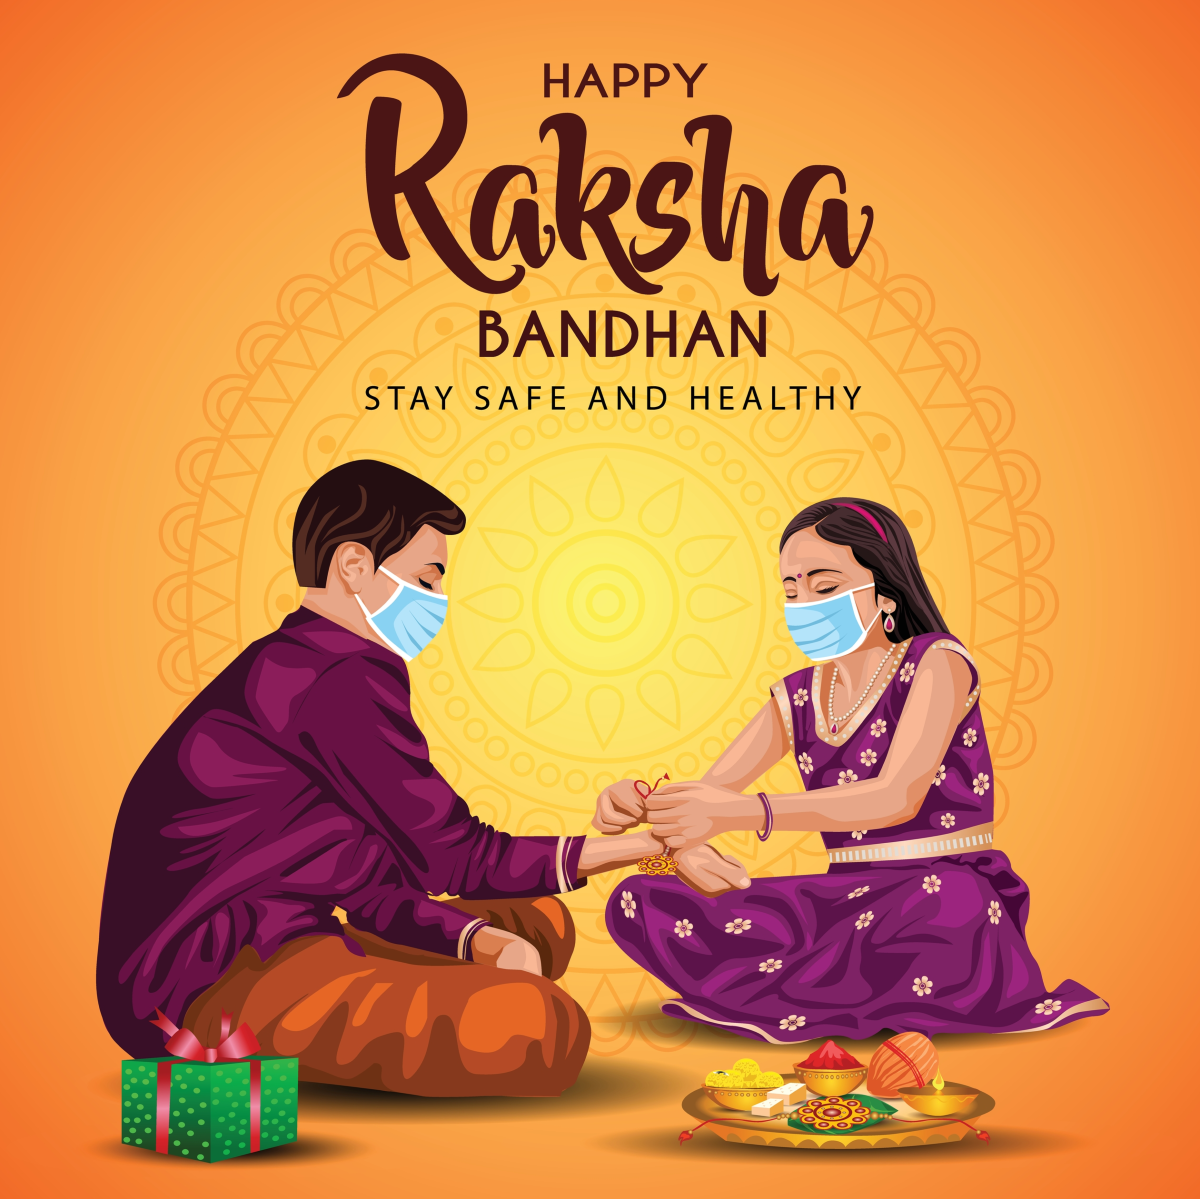 Happy Raksha Bandhan 2021: Images, Wishes, Quotes, Messages and WhatsApp  Greetings to Share with Your Siblings